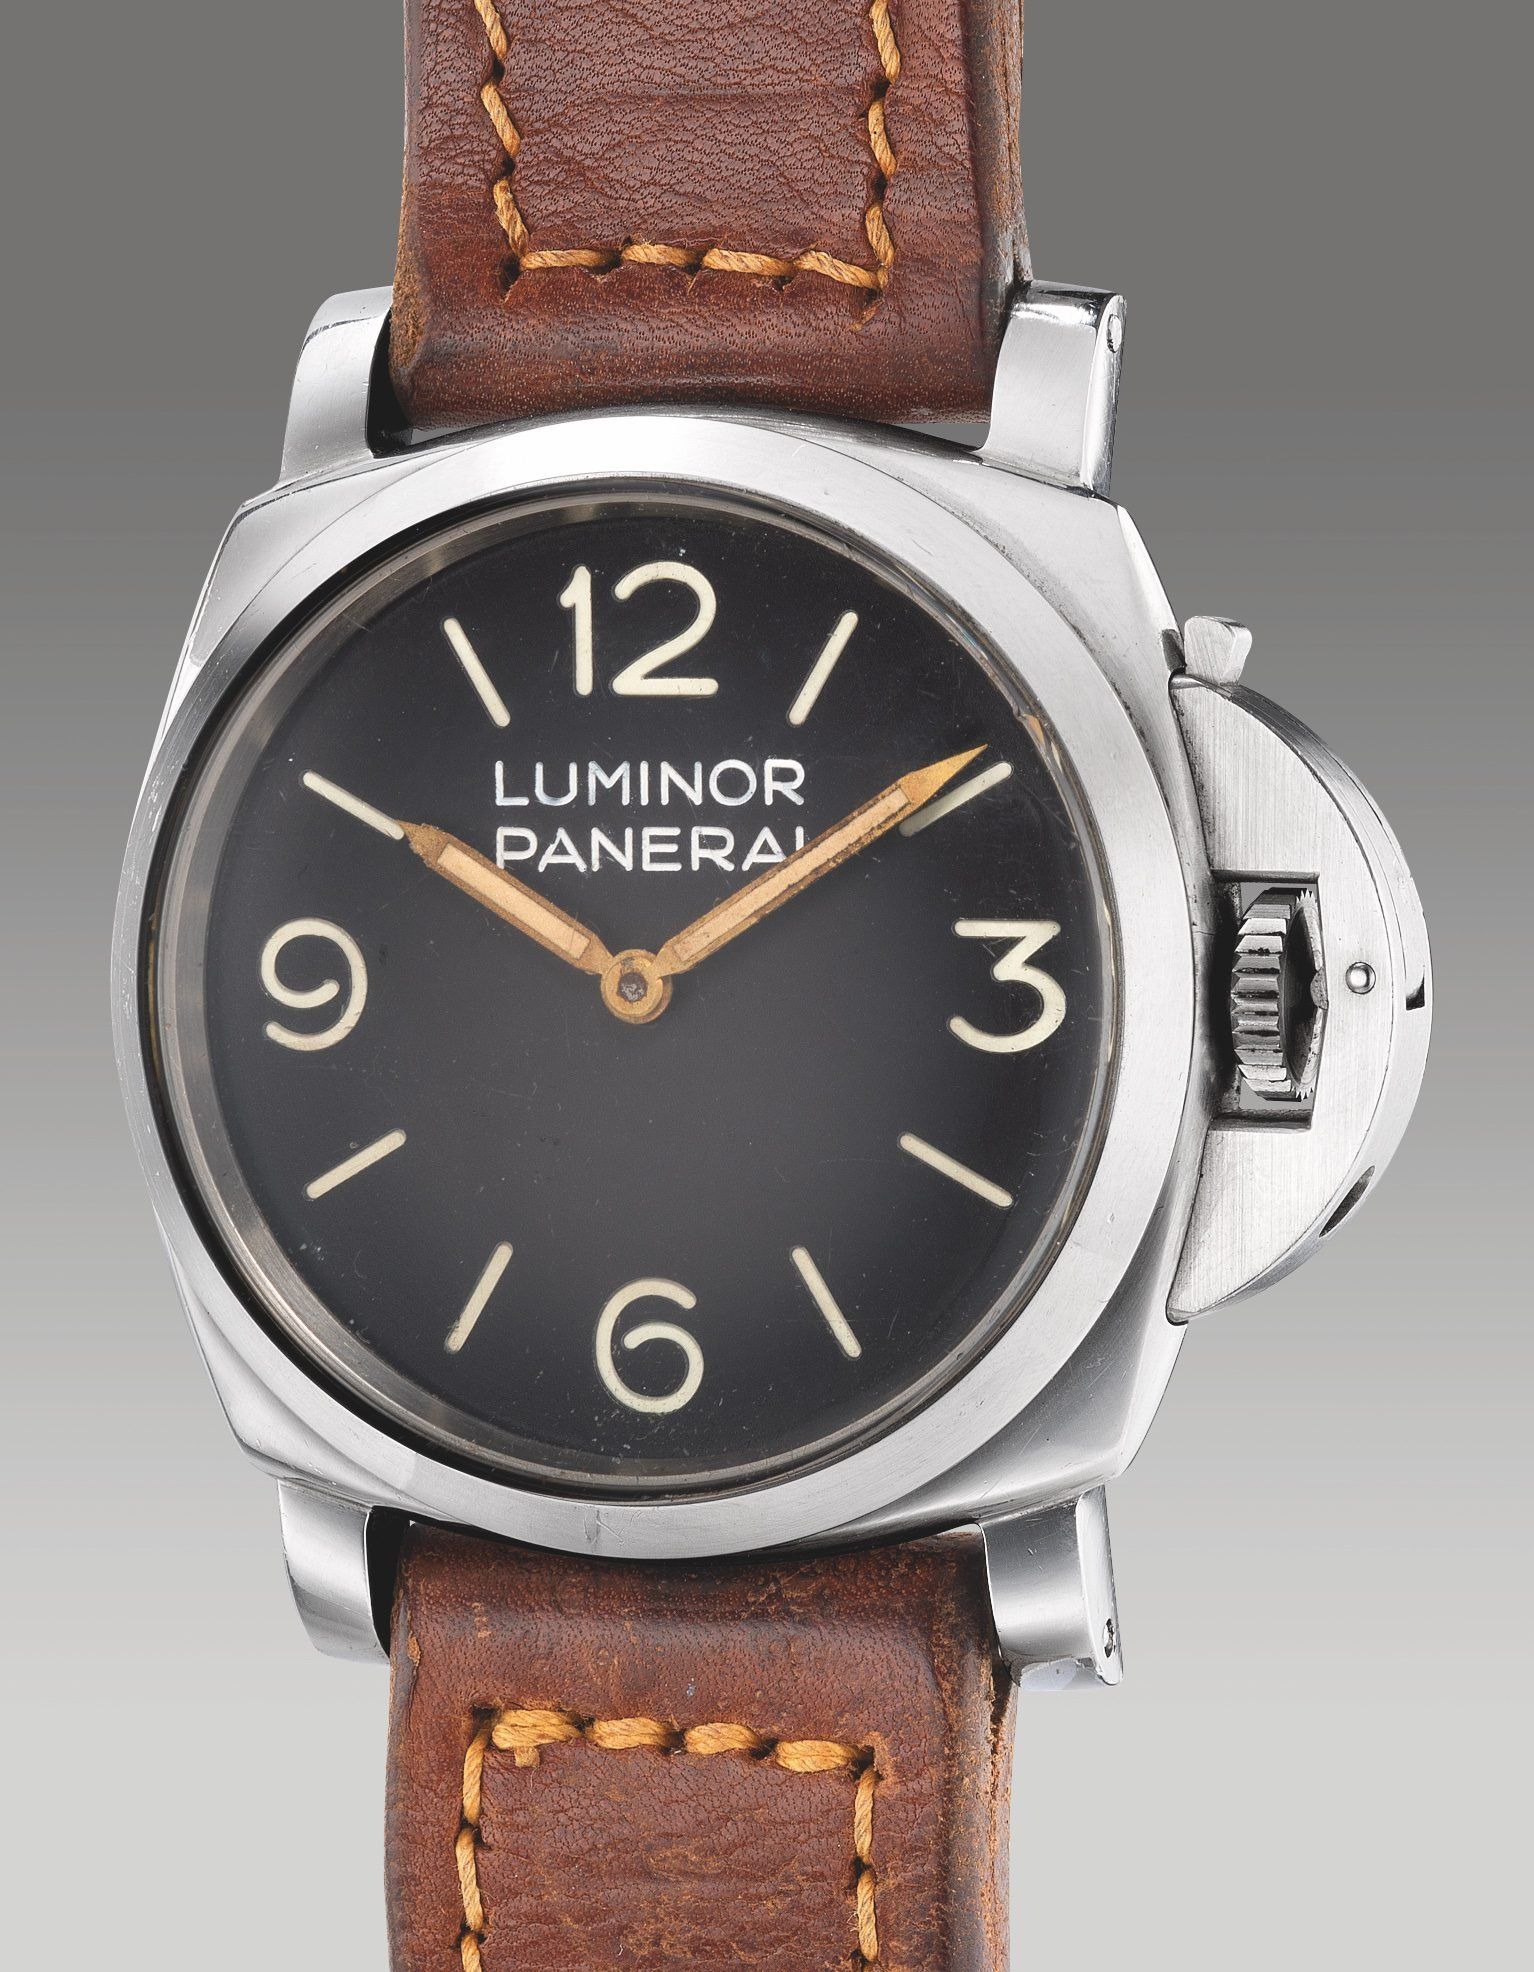 FEATURING: PANERAI - VINTAGE PANERAI WATCHES SOLD BY THE PHILLIPS AUCTION HOUSE